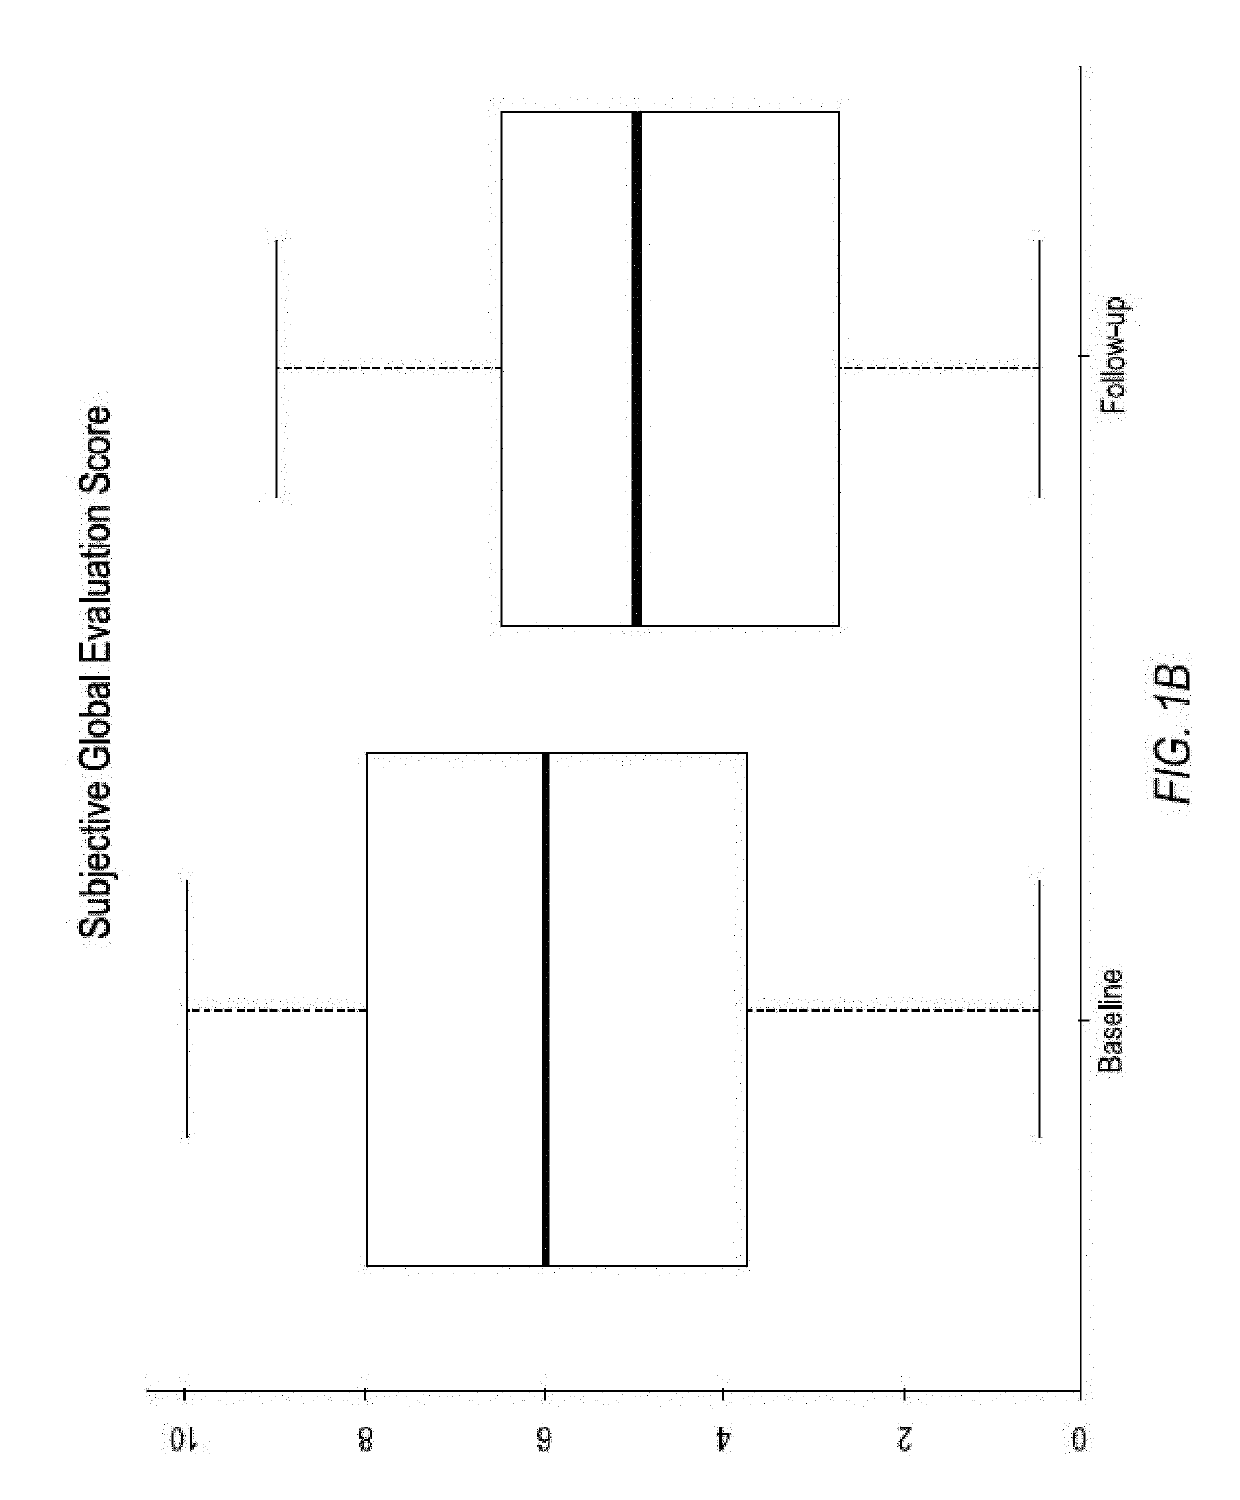 Compositions and methods for treating ocular diseases